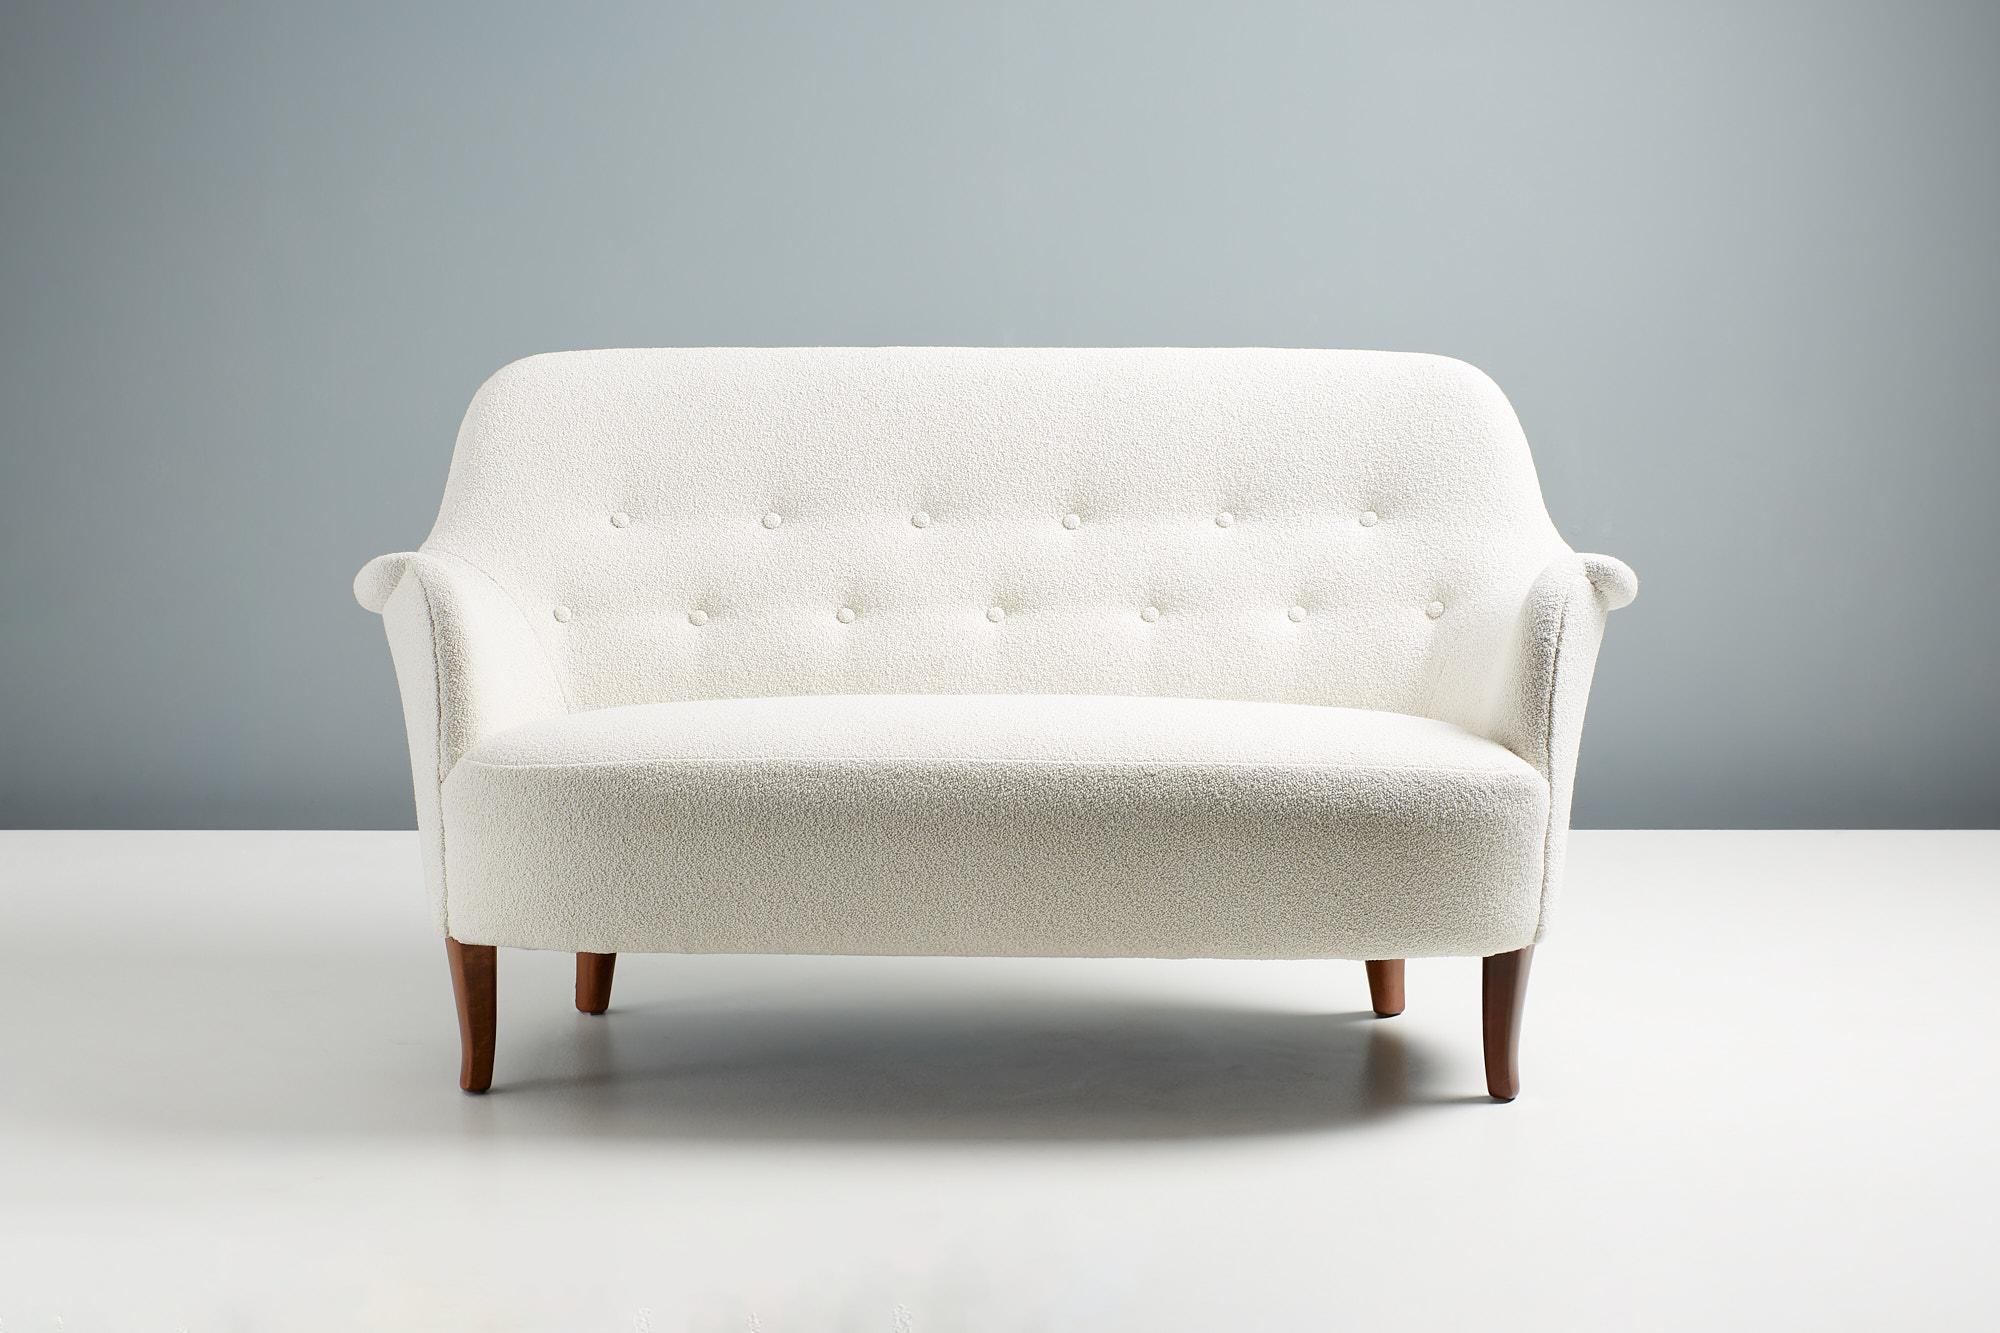 Carl Malmsten - Cirkus Sofa, c1950s

Model 'Cirkus' love-seat sofa, designed in the 1950s by Swedish Master designer Carl Malmsten and produced by OH Sjögren in Tranås, Sweden. The sofa has restored and re-finsiehd stained elm wood legs and has